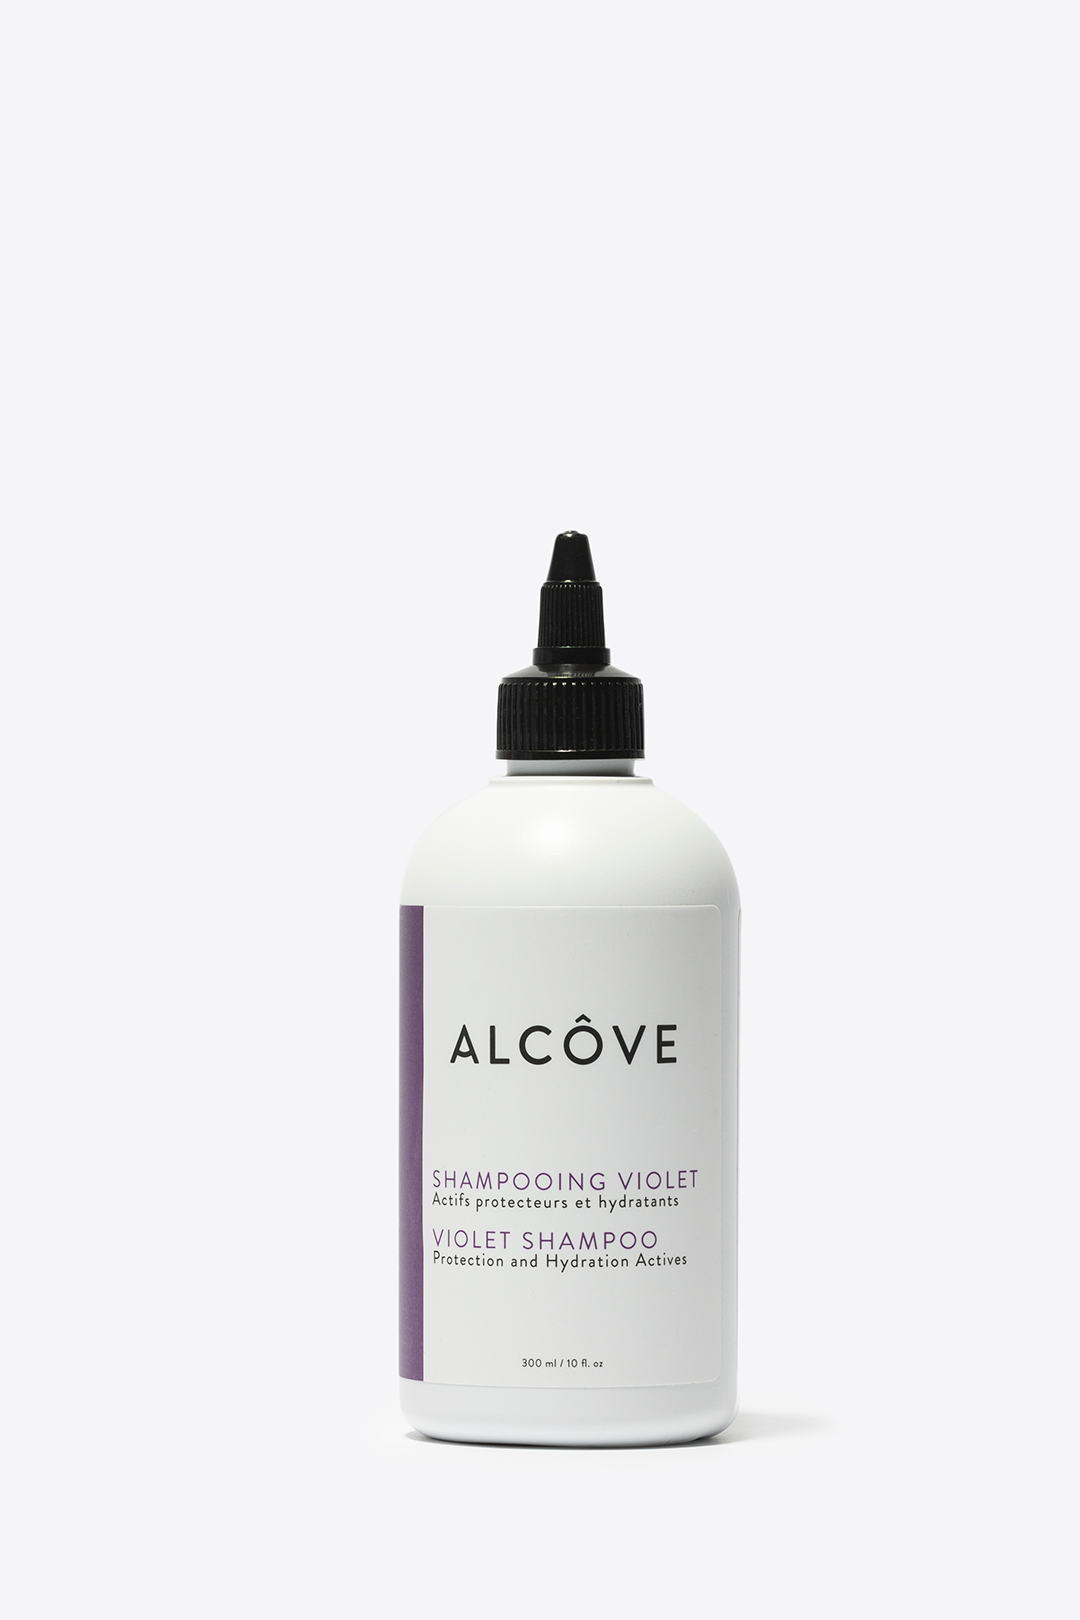 Alcove - VIOLET SHAMPOO - by Alcove |ProCare Outlet|